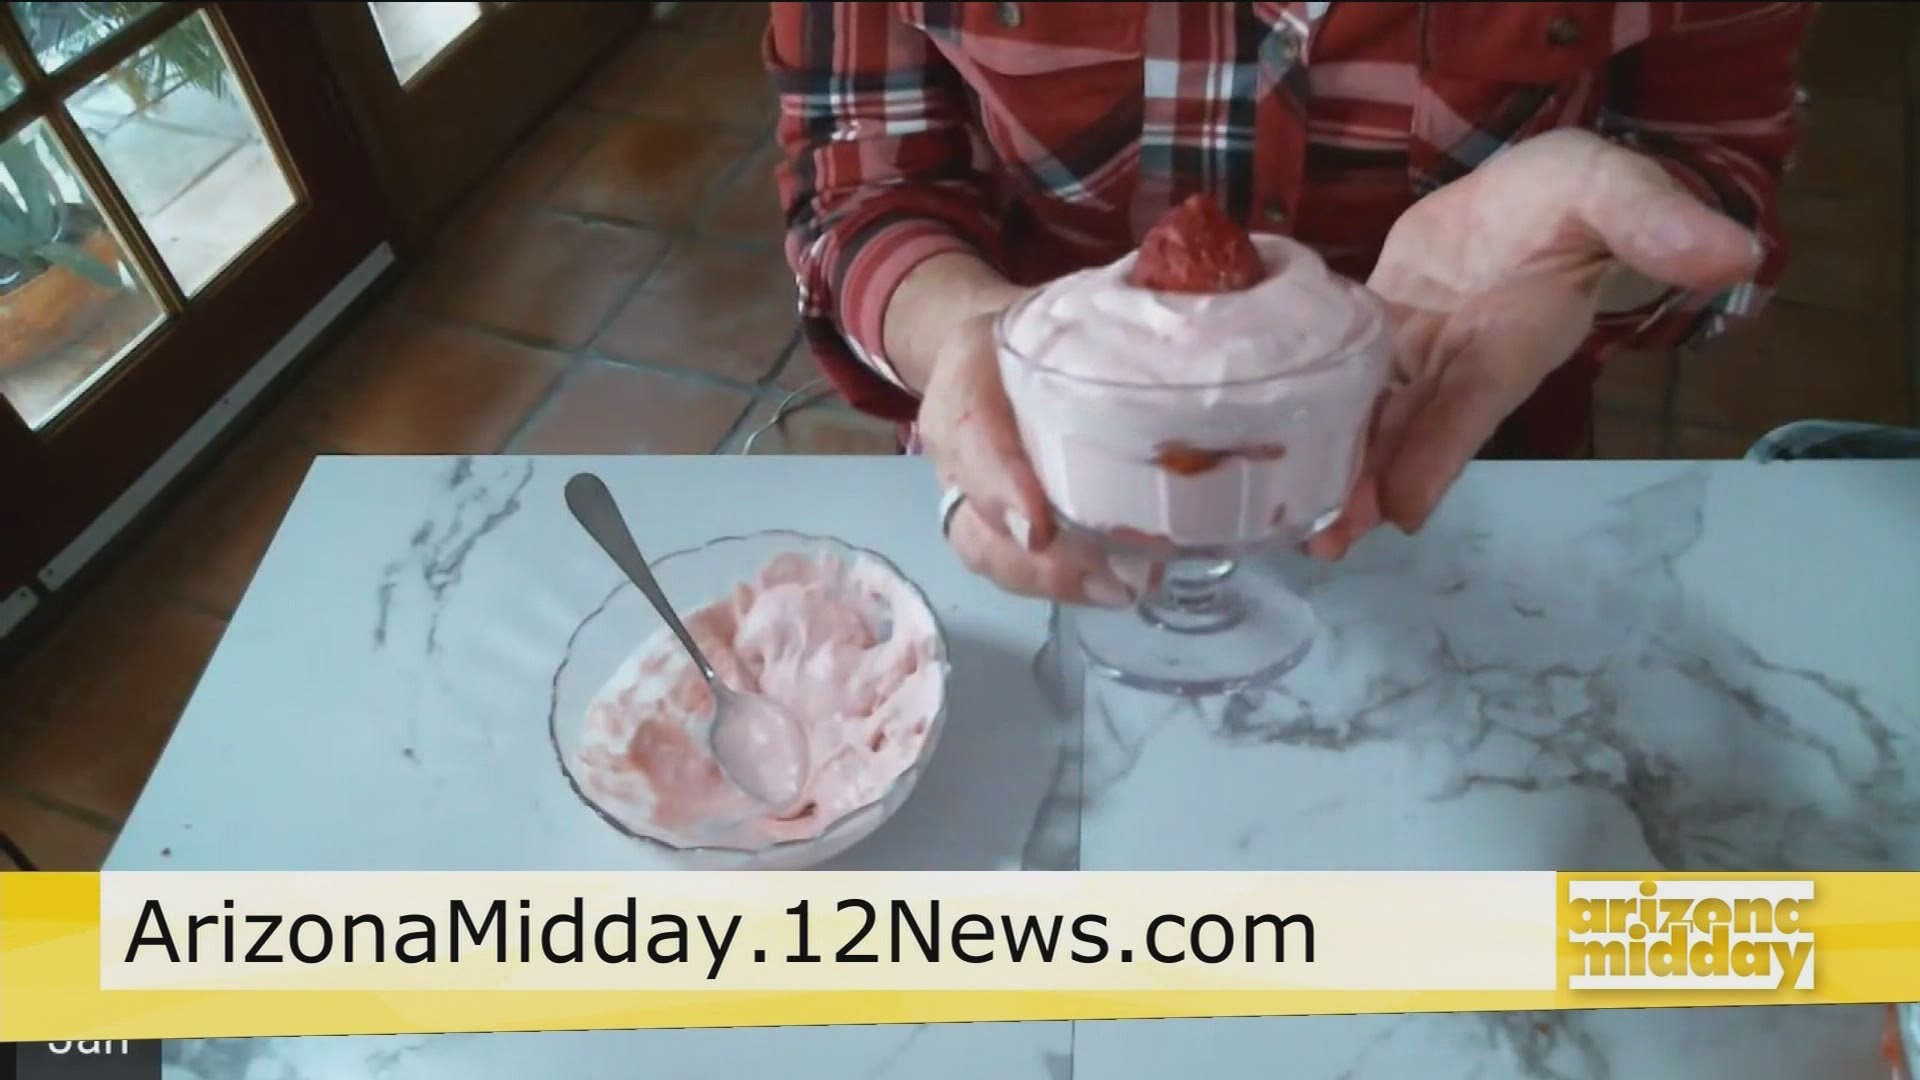 Jan shows us how to create the super simple Strawberry Fool Dessert